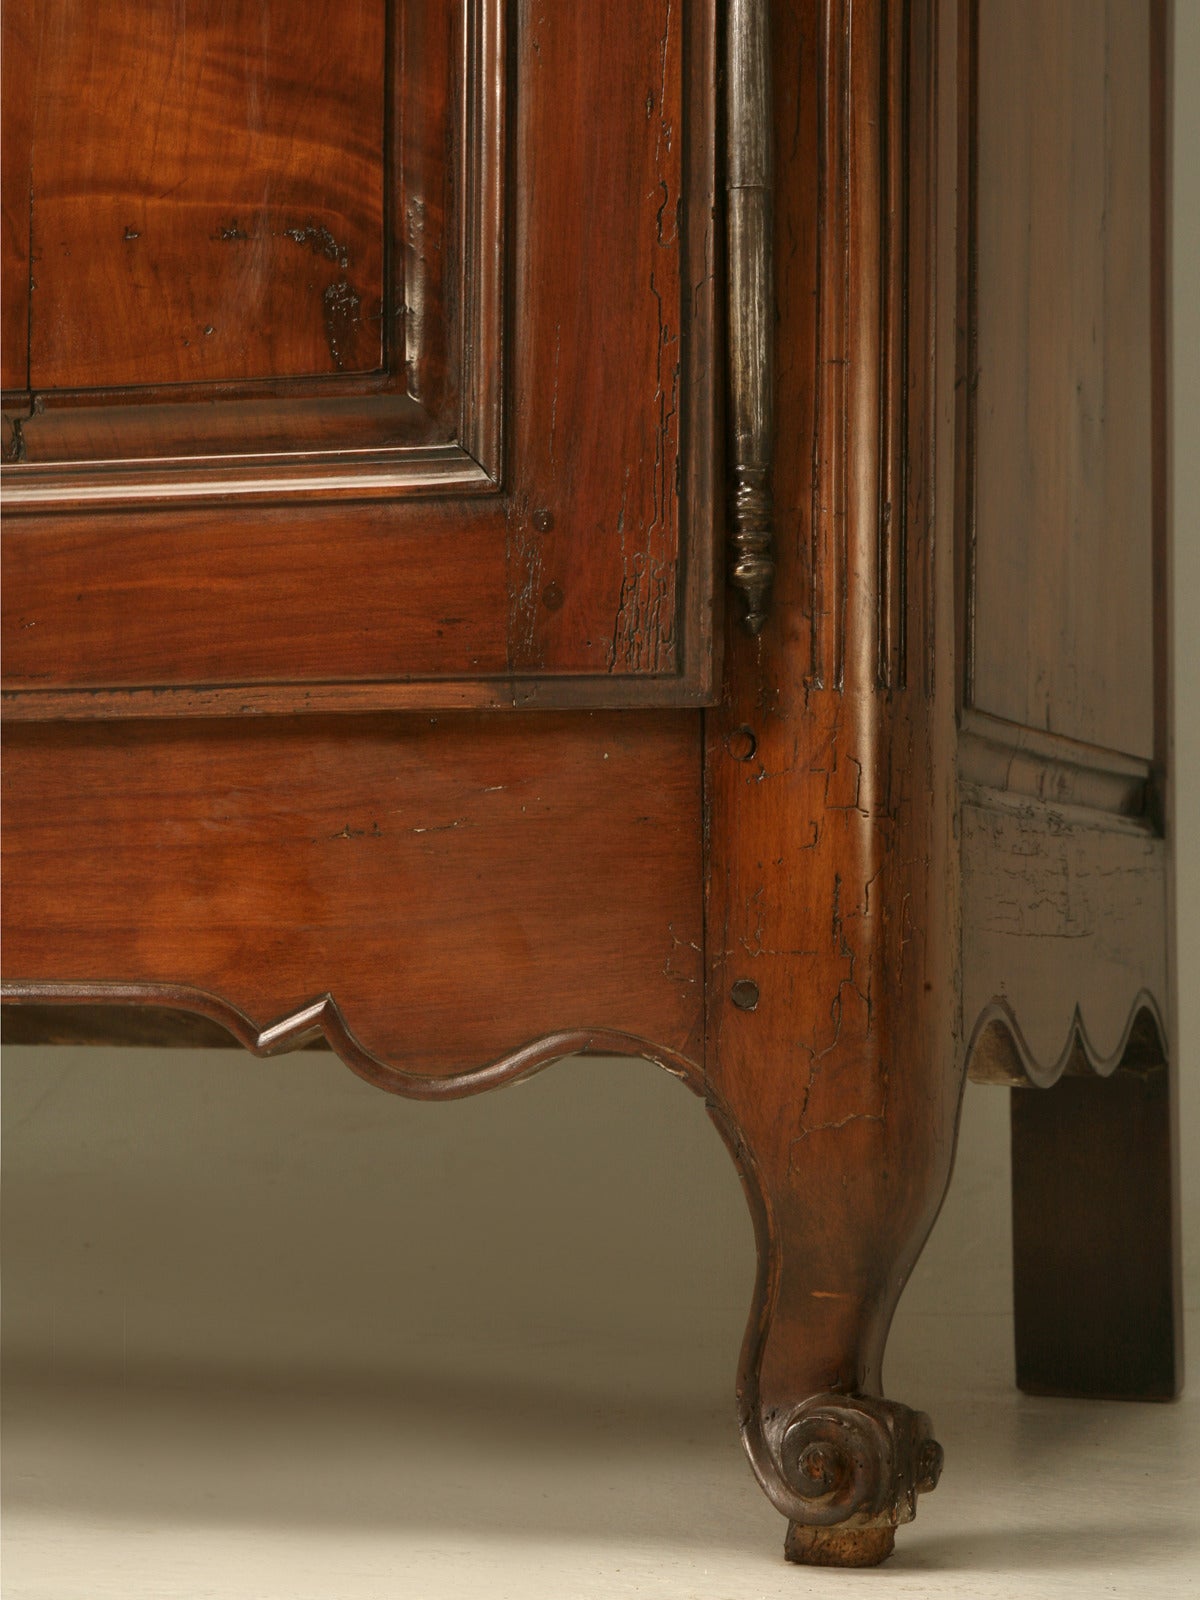 Steel French Louis XV Style Armoire in Cherrywood, circa early 1800's Fully Restored